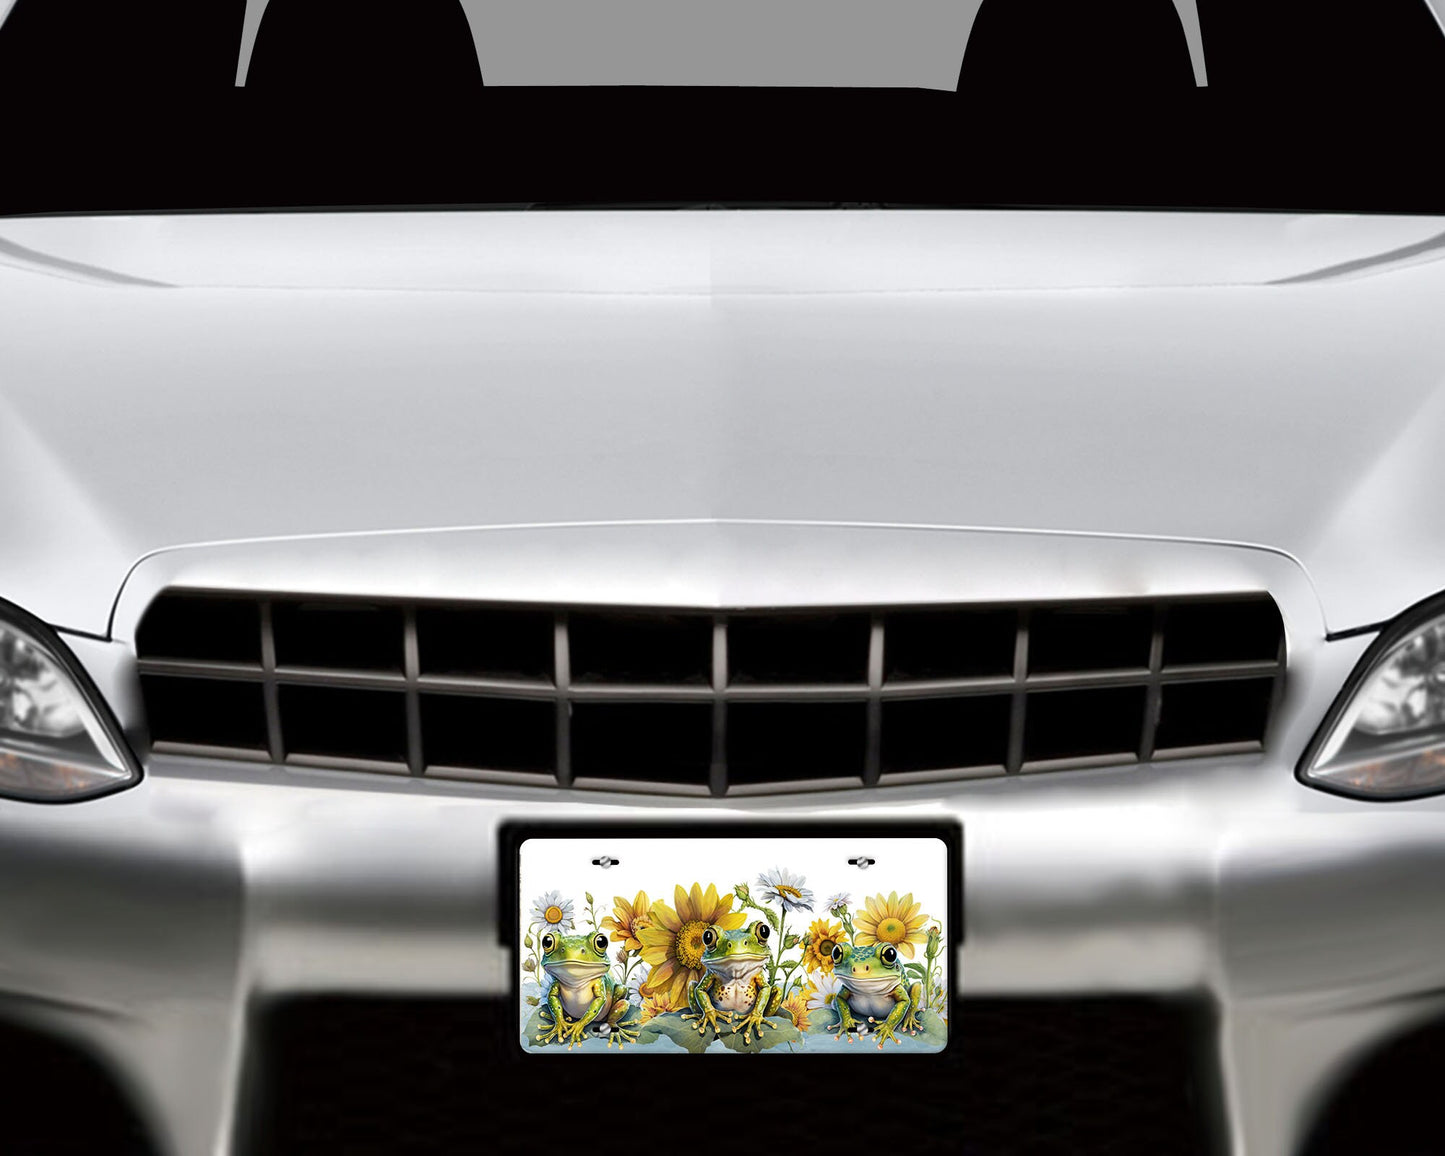 New Release Frogs Aluminum Vanity License Plate Car Accessory Decorative Front Plate